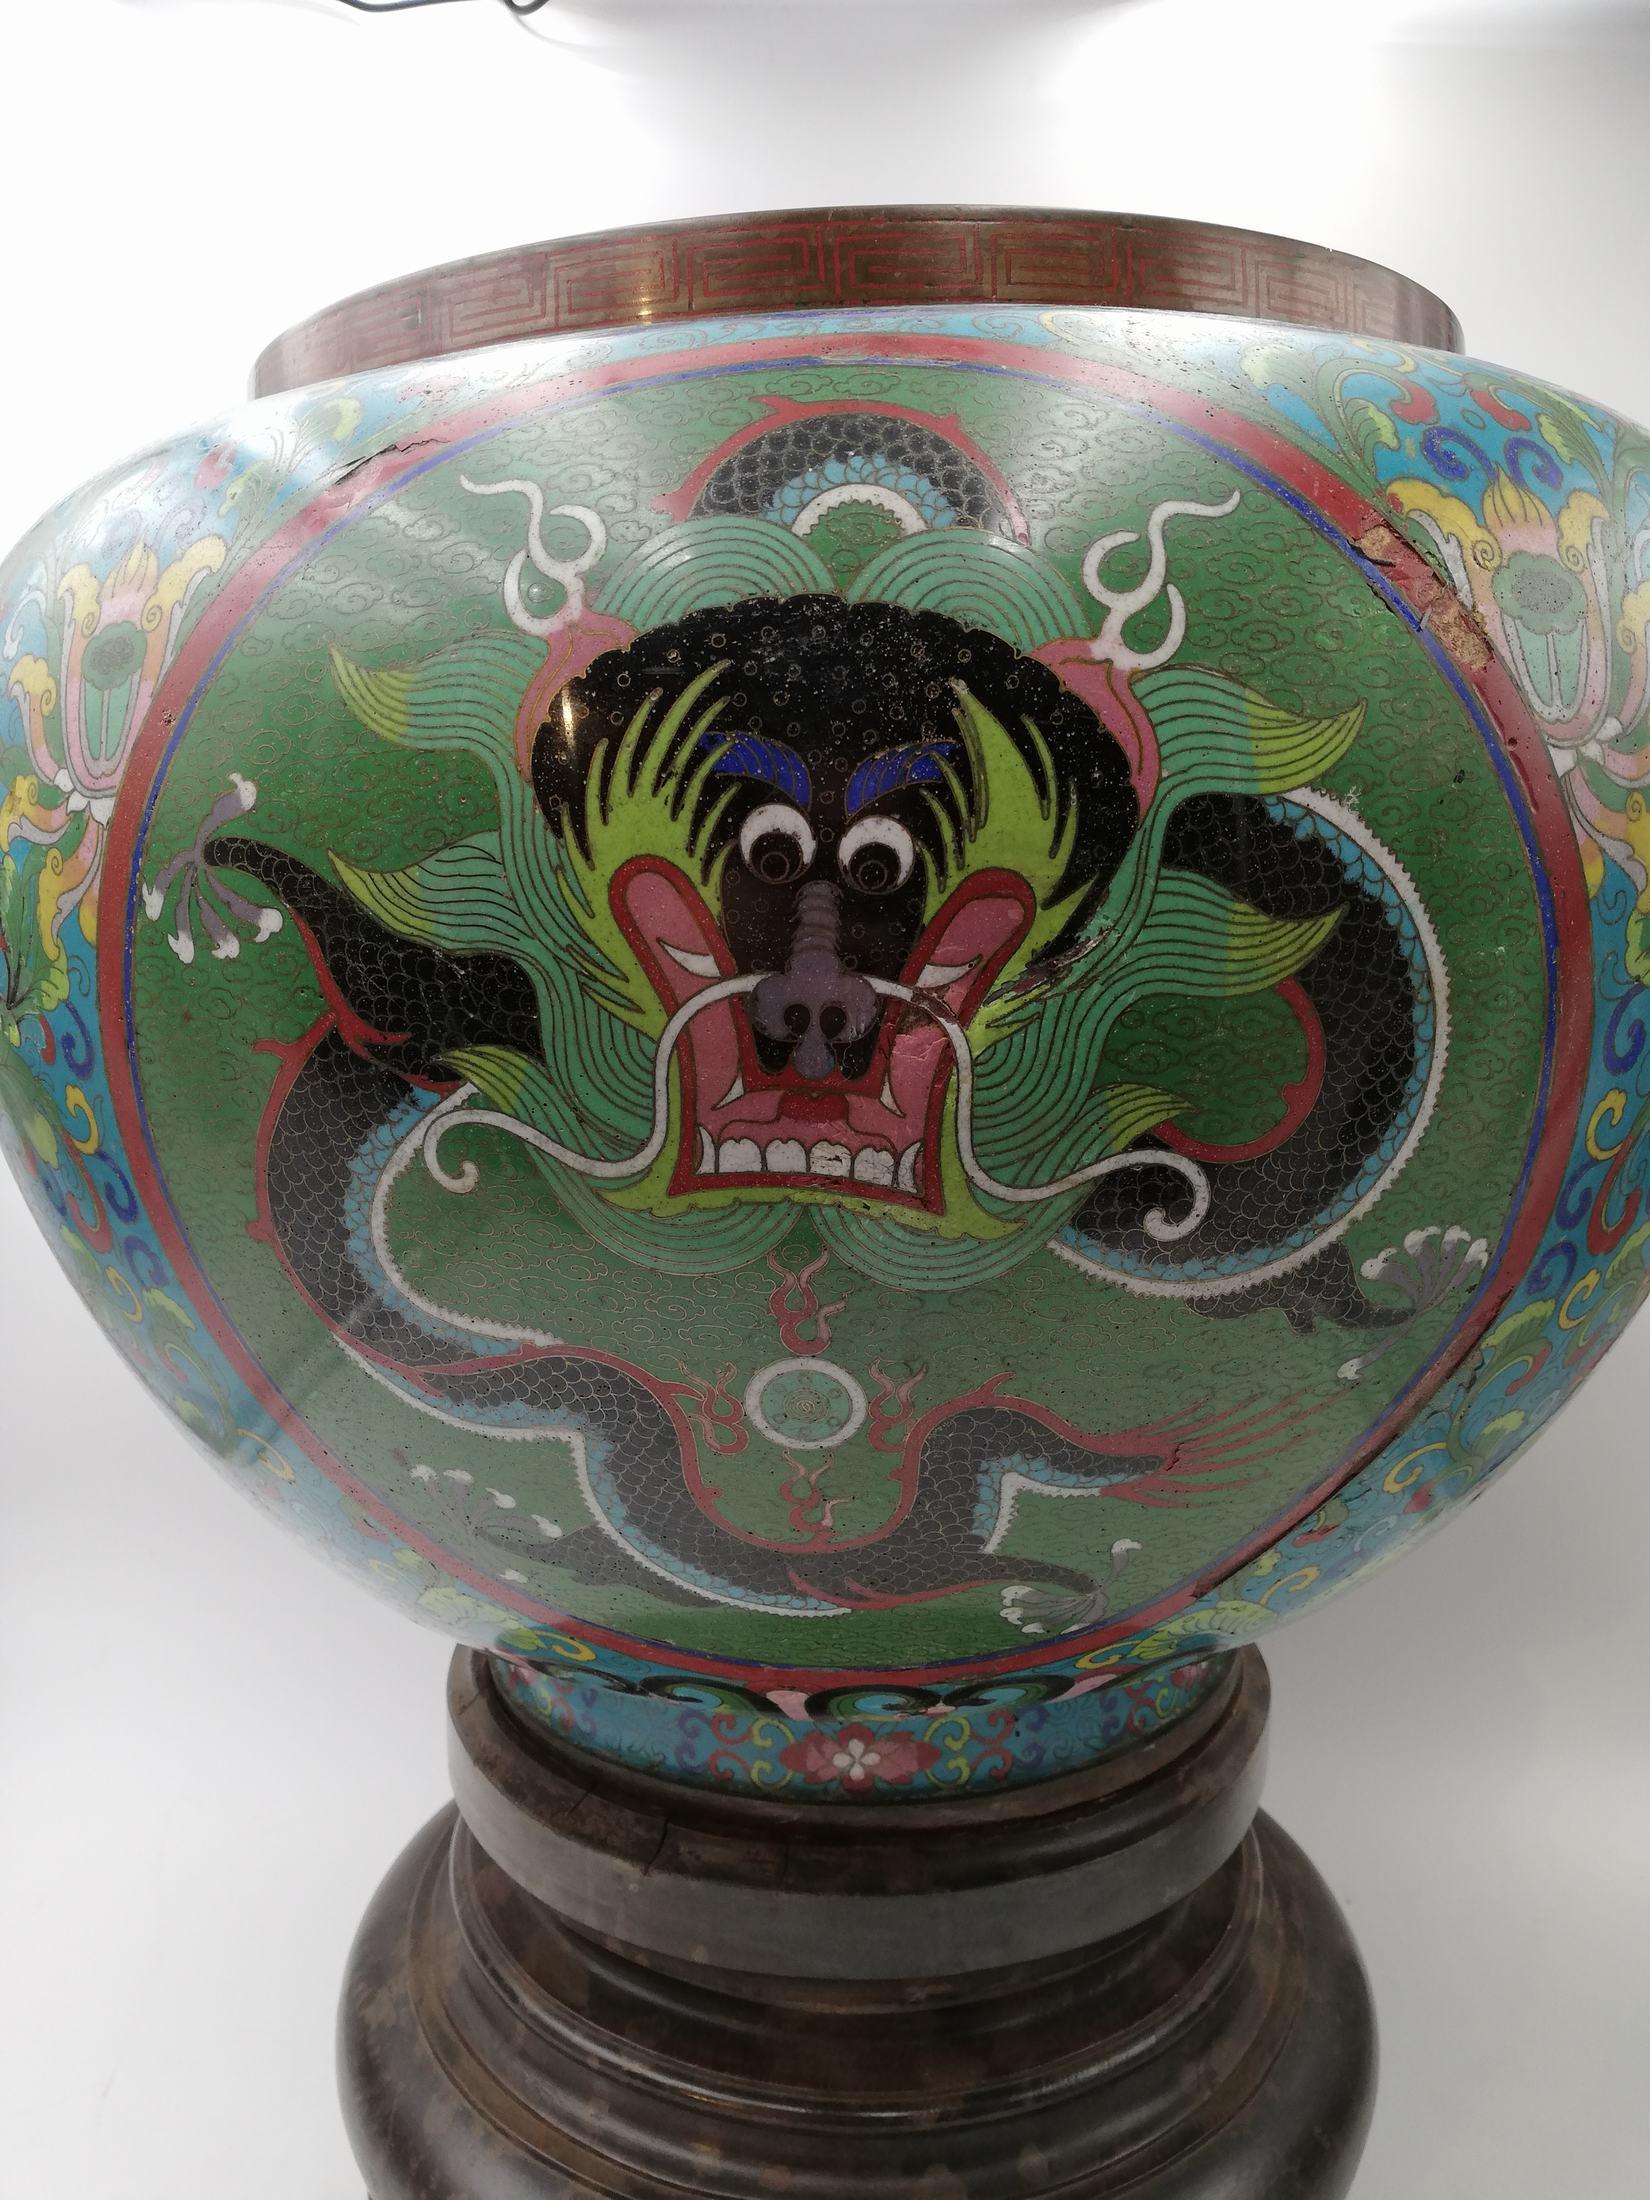 19th Century Spherical Vase Forming Planter Cloisonné Decorated with Polychrome Floral Motifs For Sale